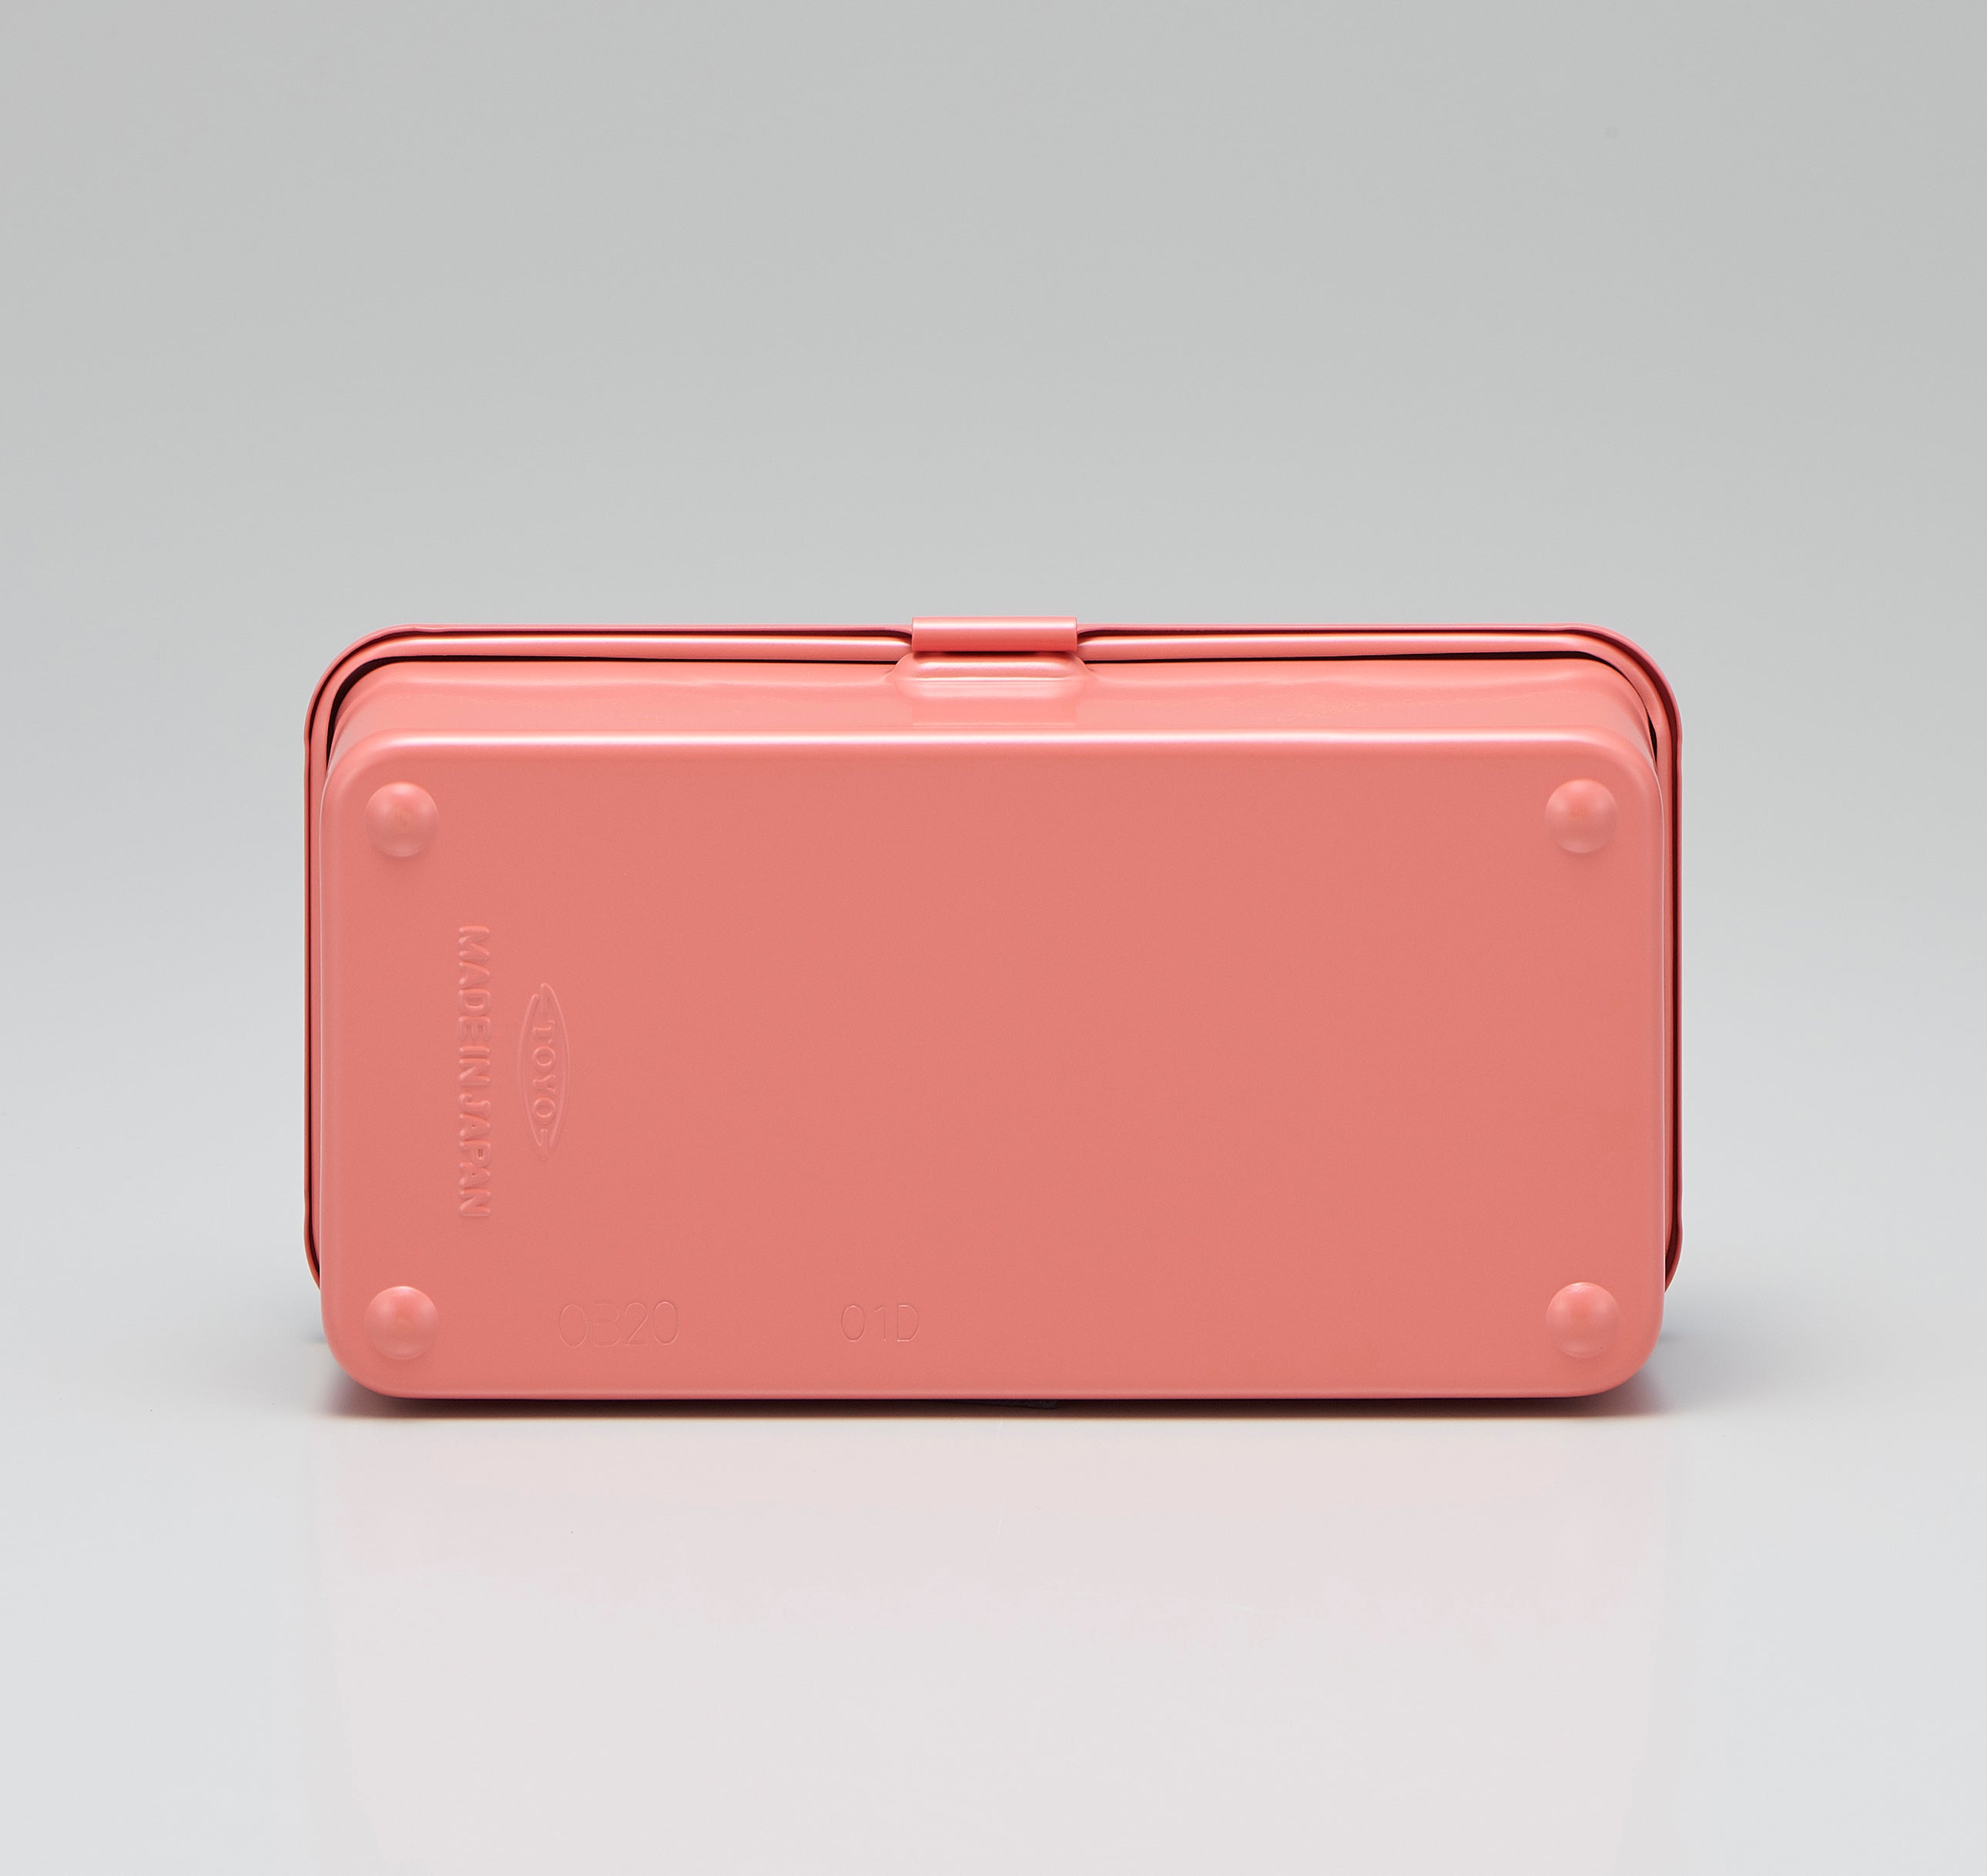 TOYO STEEL - Trunk Shape Toolbox T-190 Living Coral